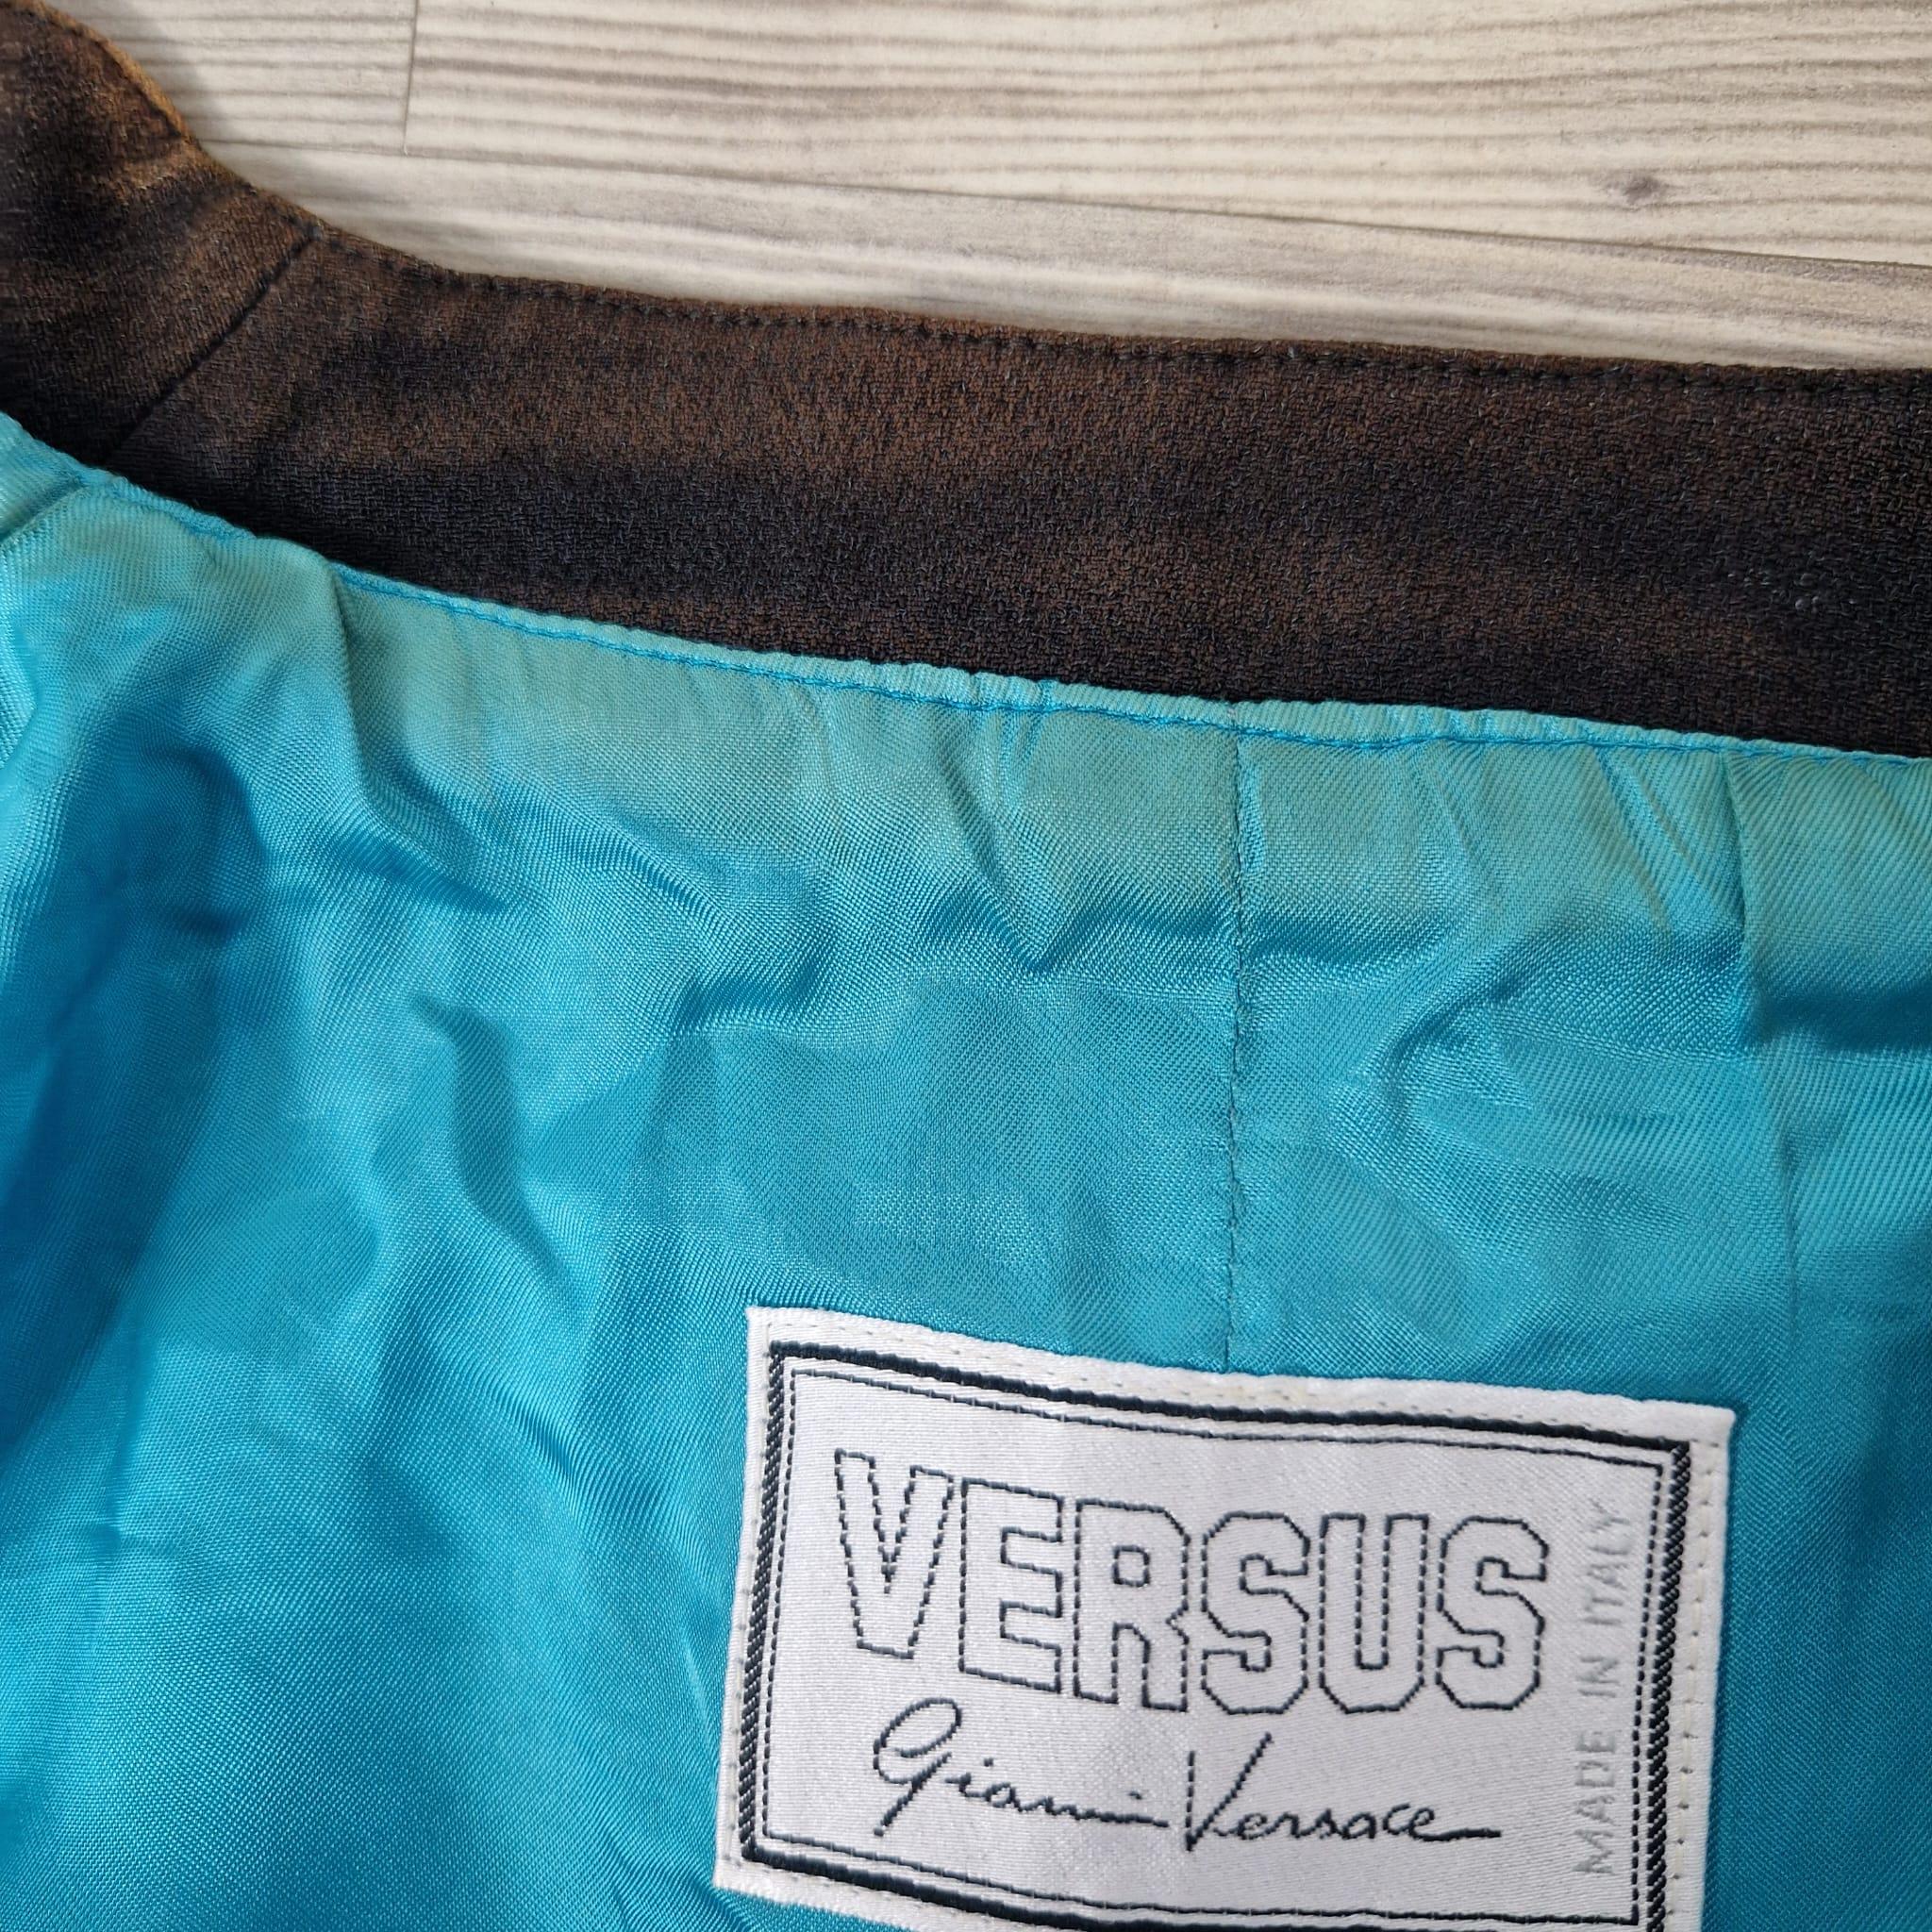 Blue Blazer Versus by Gianni Versace year 1989. For Sale